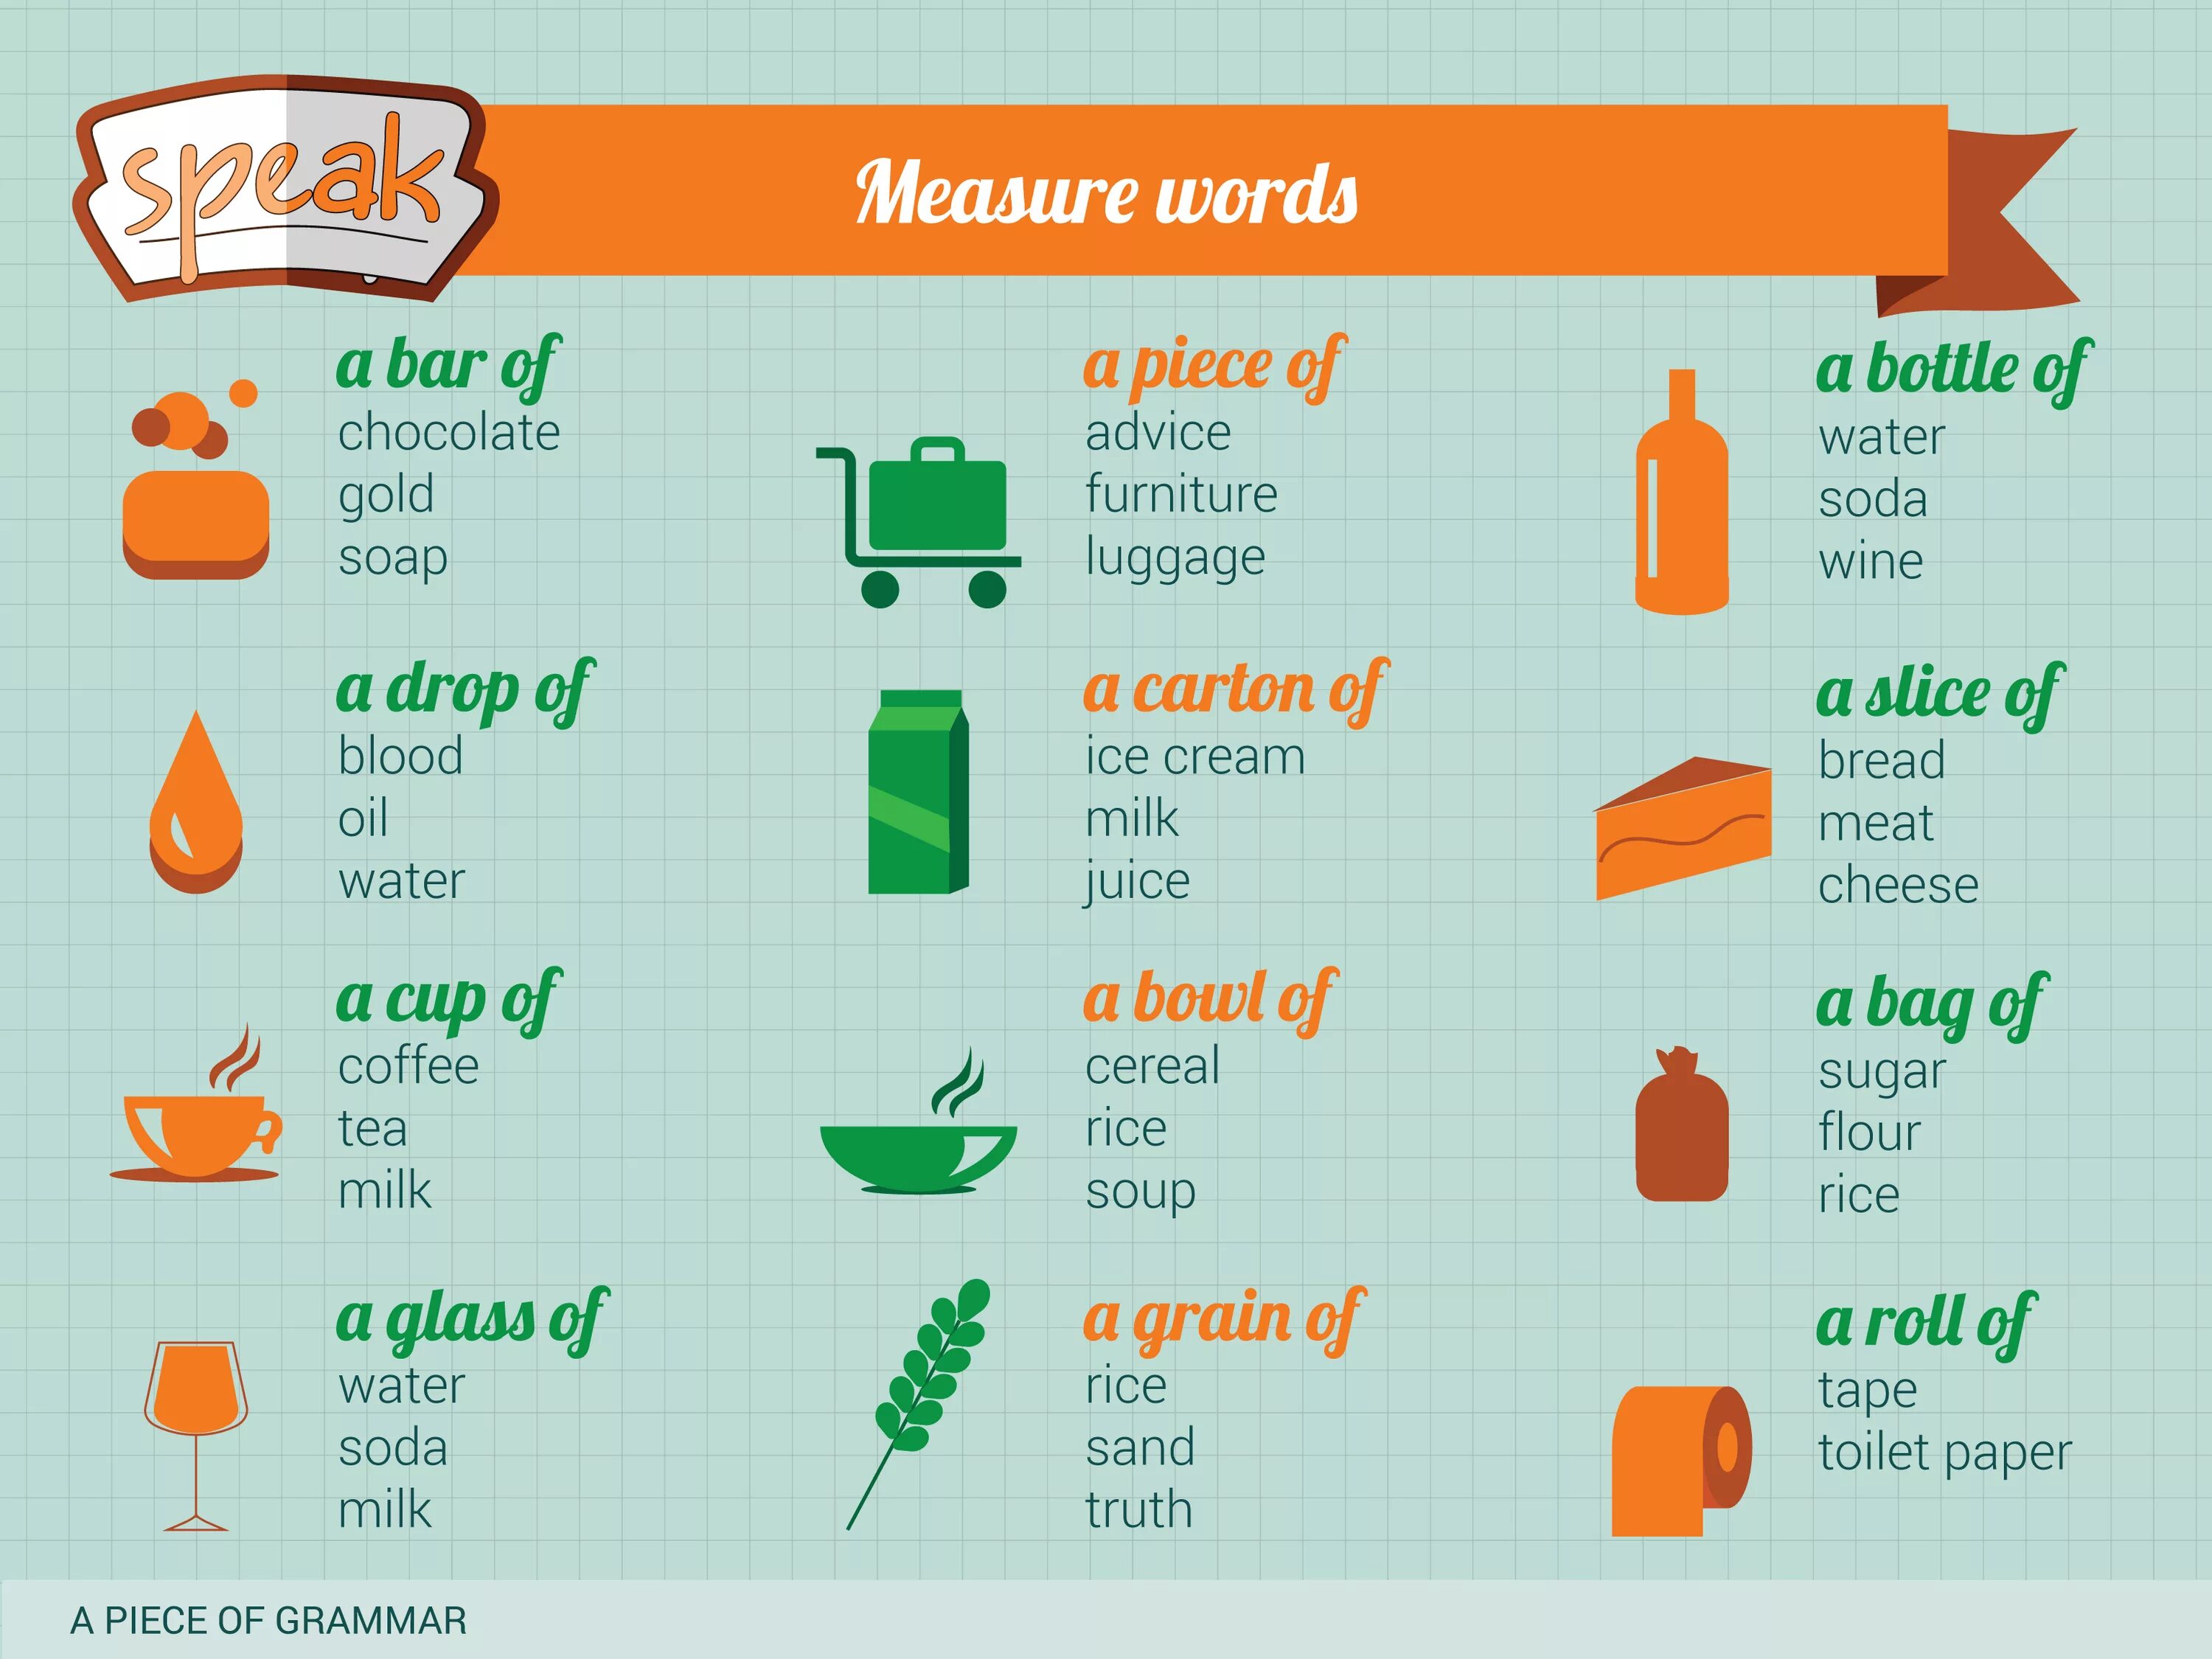 Package word. Uncountable Nouns. Countable and uncountable Nouns. Measure Words в английском. Countable and uncountable Nouns таблица.